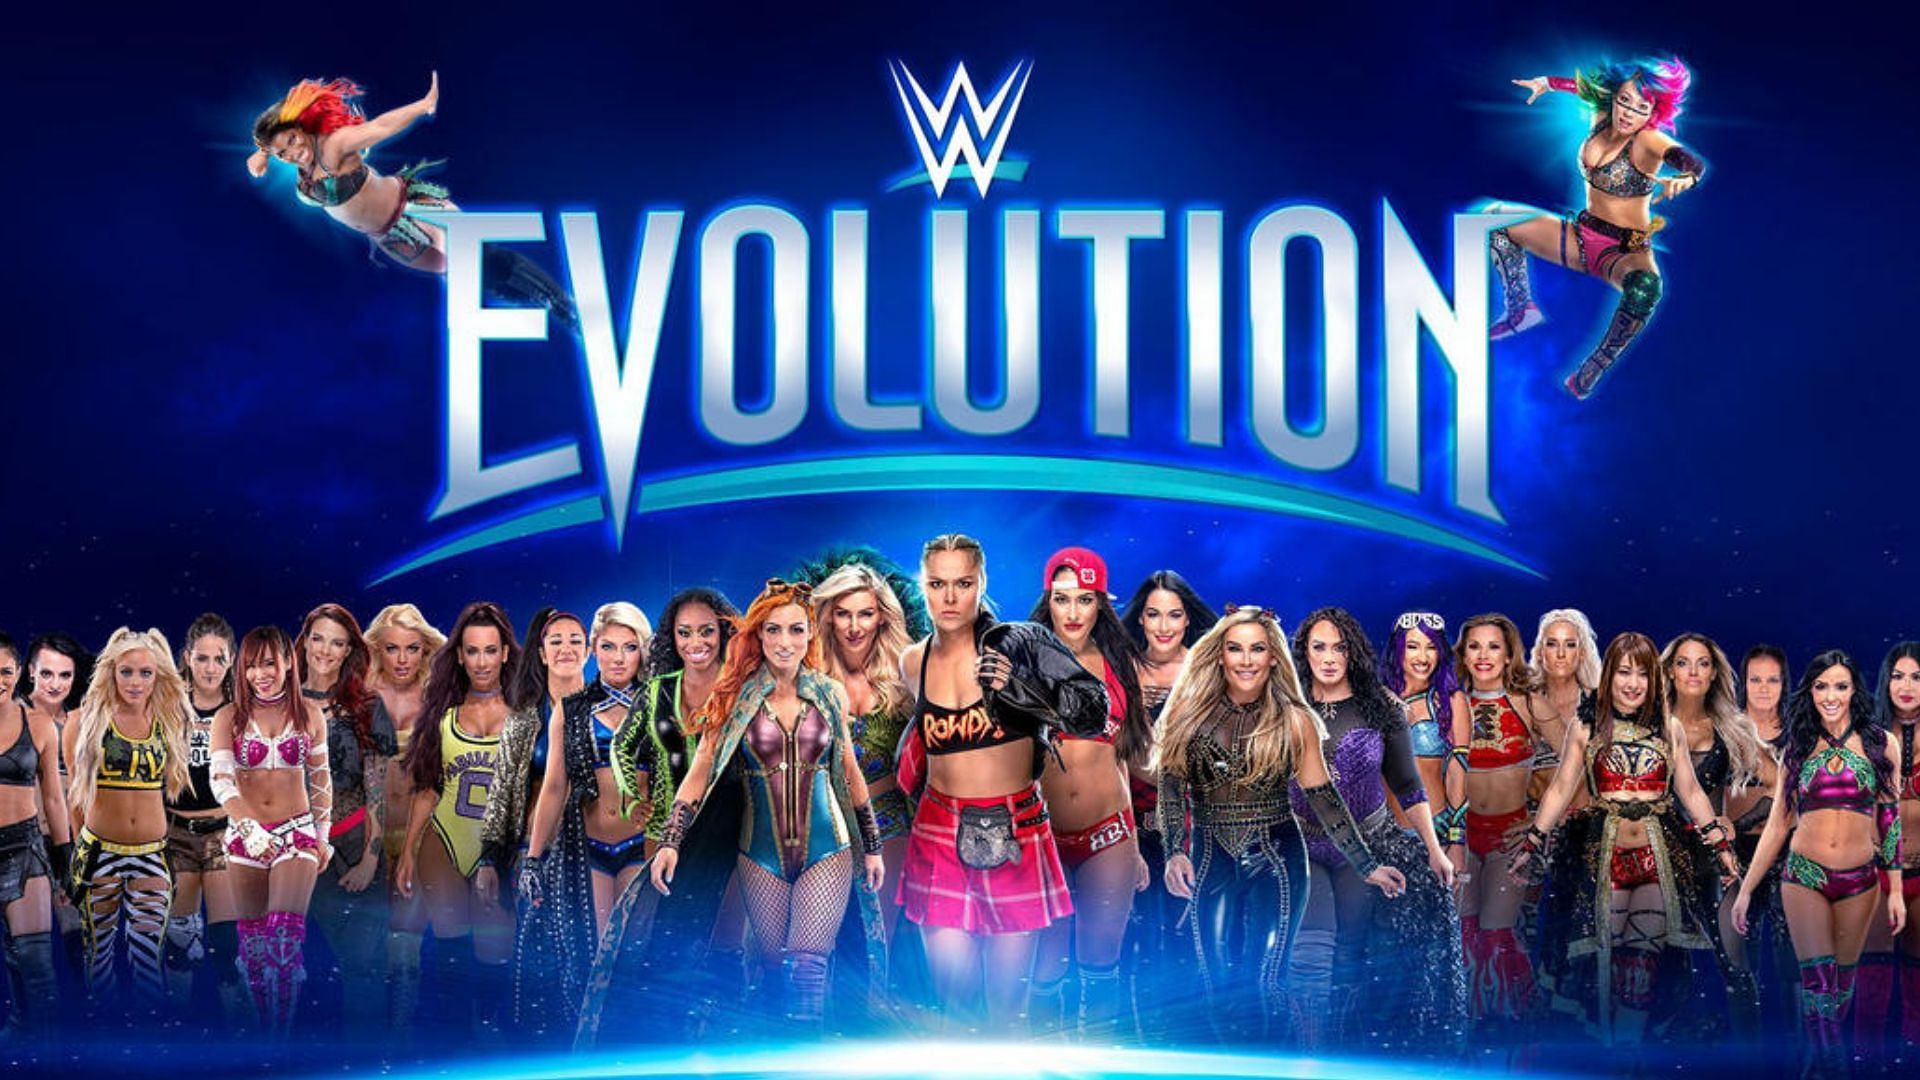 WWE Evolution PLE took place in 2018!